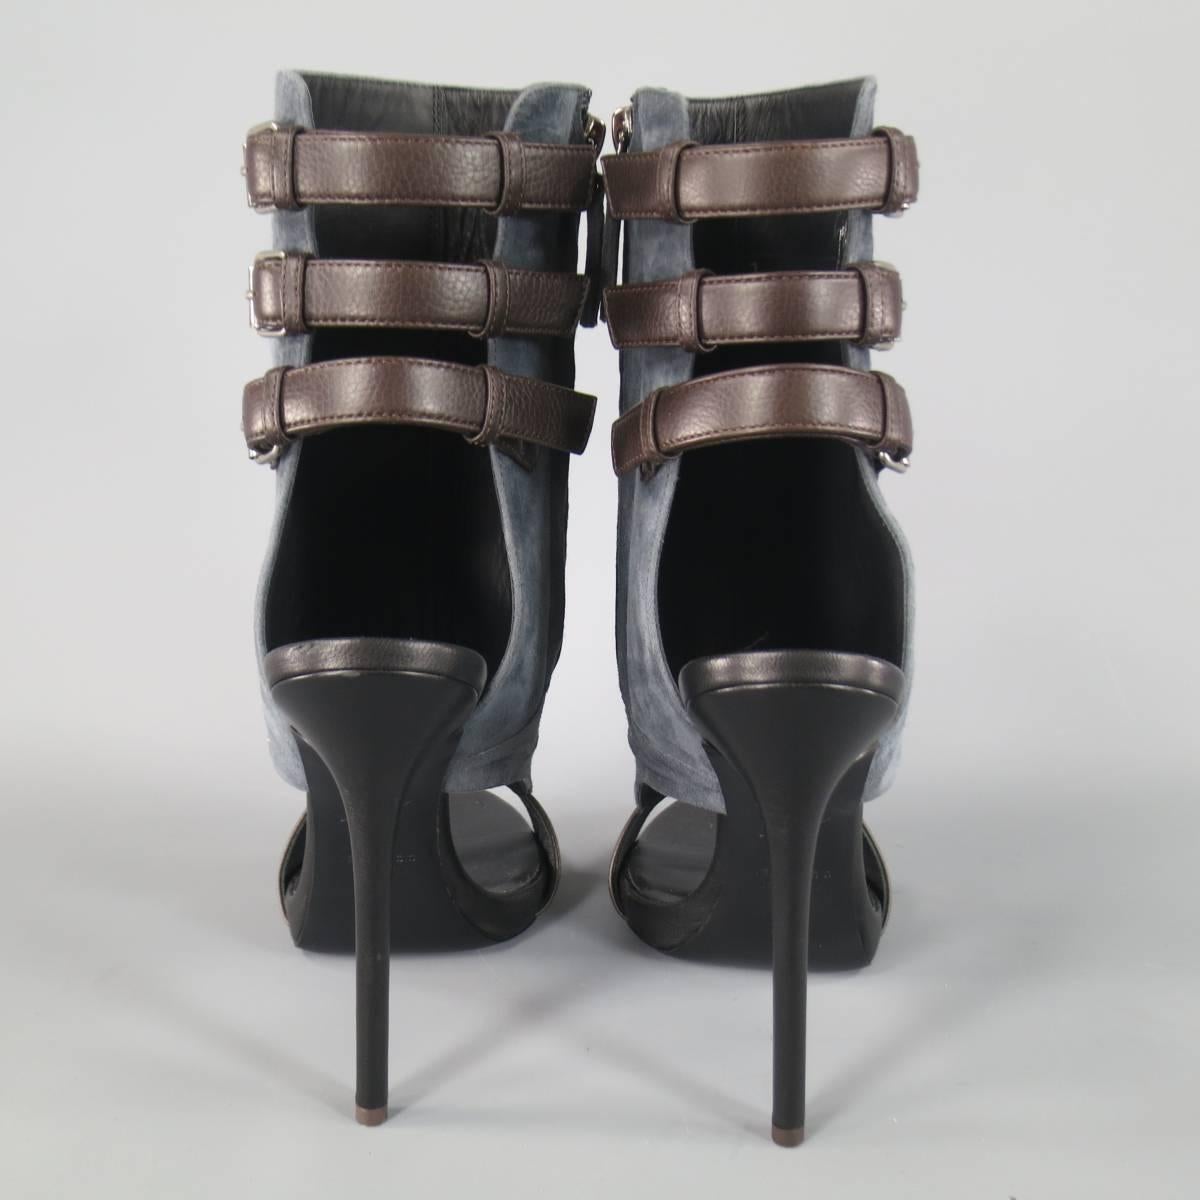 GIUSEPPE ZANOTTI Size 8.5 Gray Suede Brown Leather Buckle Straps Peep Toe Boots 1